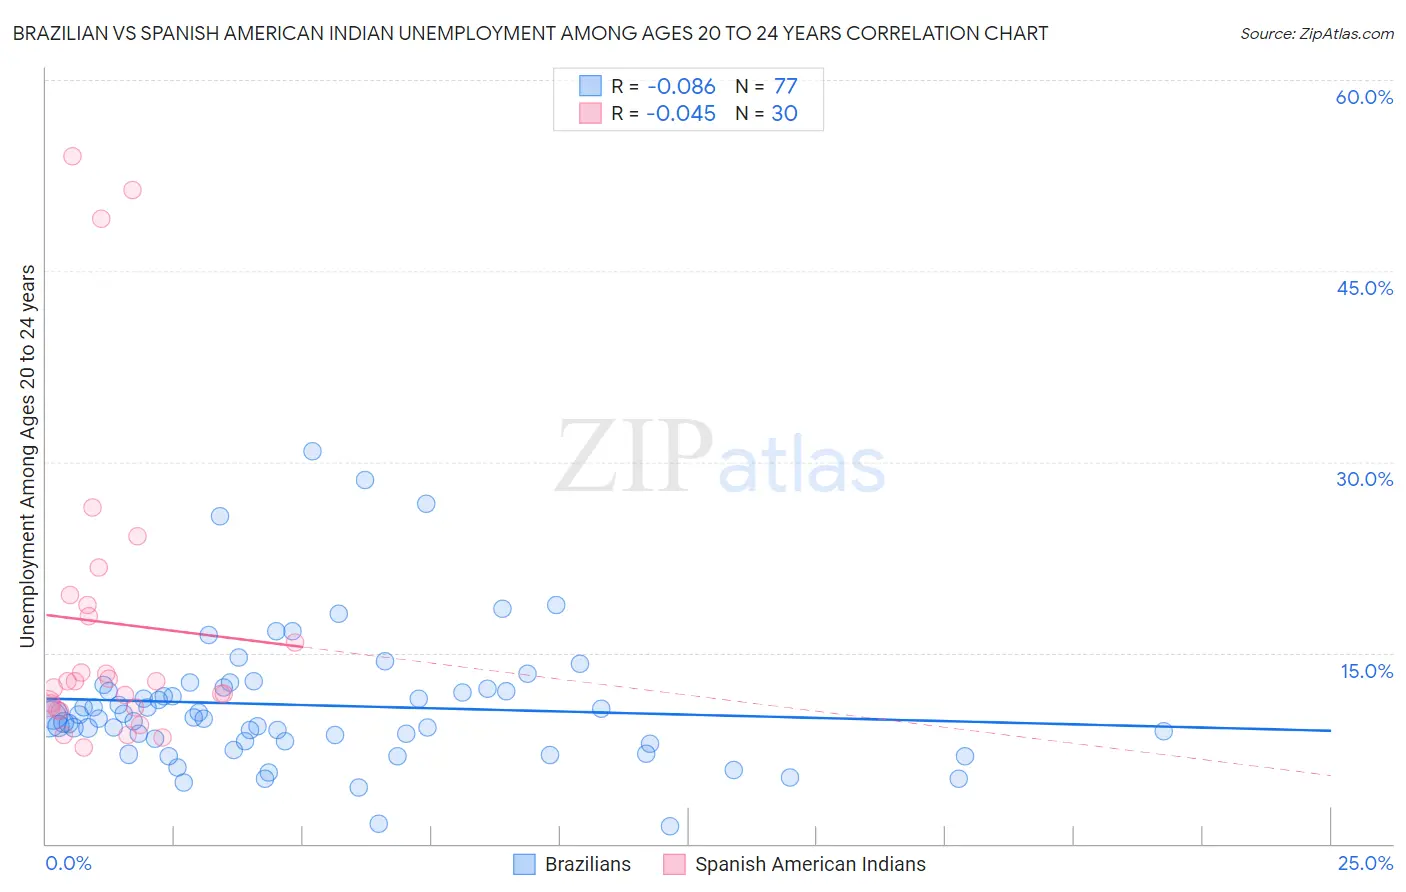 Brazilian vs Spanish American Indian Unemployment Among Ages 20 to 24 years